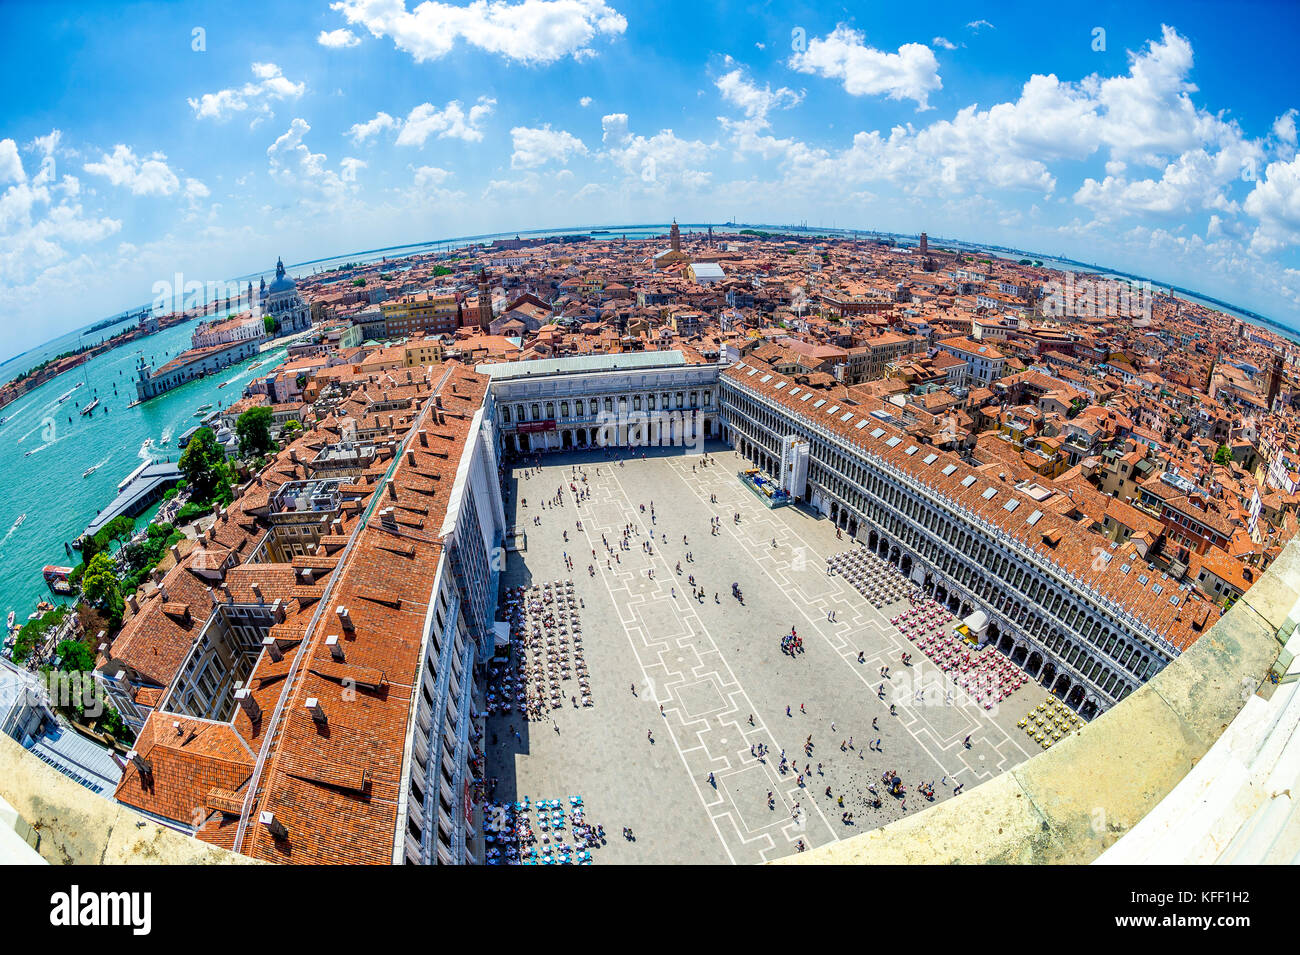 Aerial view of St Mark's Square (Piazza San Marco) in Venice, Italy. Fisheye lens perspective. Stock Photo